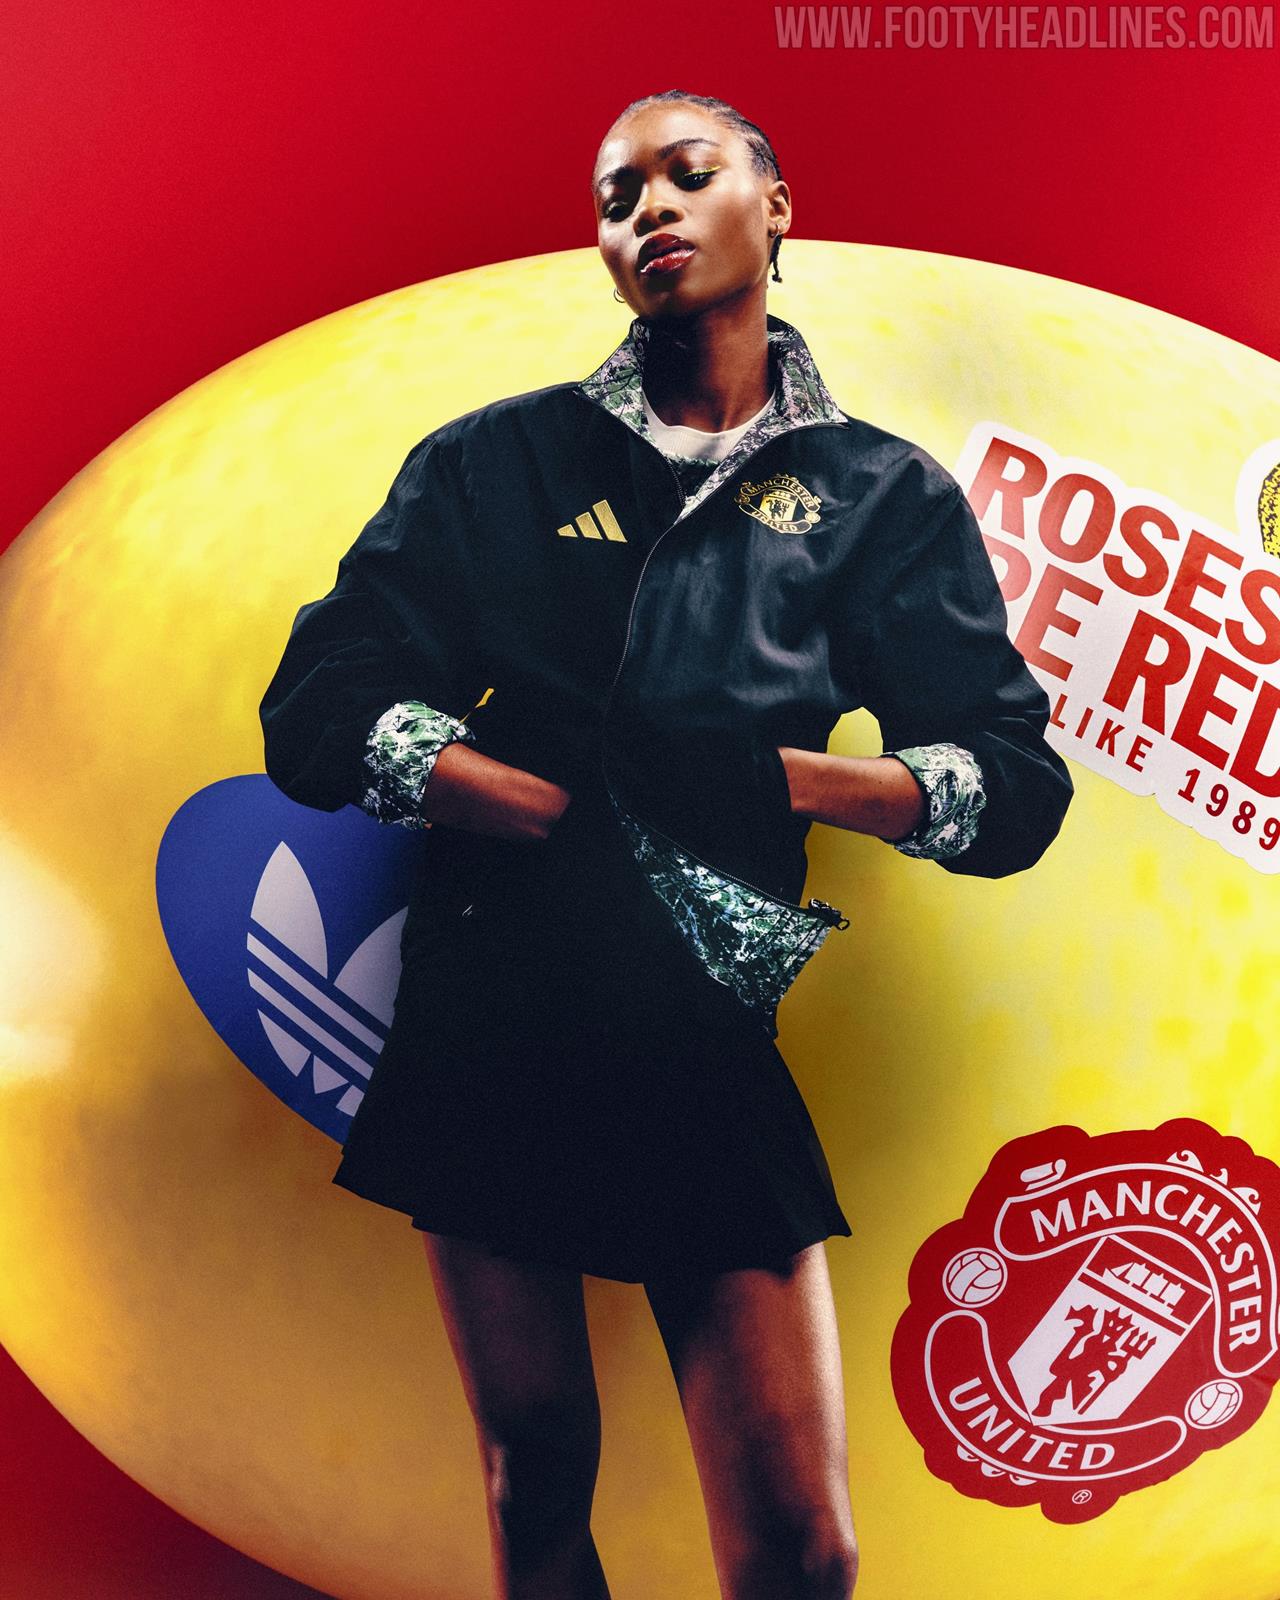 The Stone Roses & Manchester United Team Up For Adidas Merch Collection